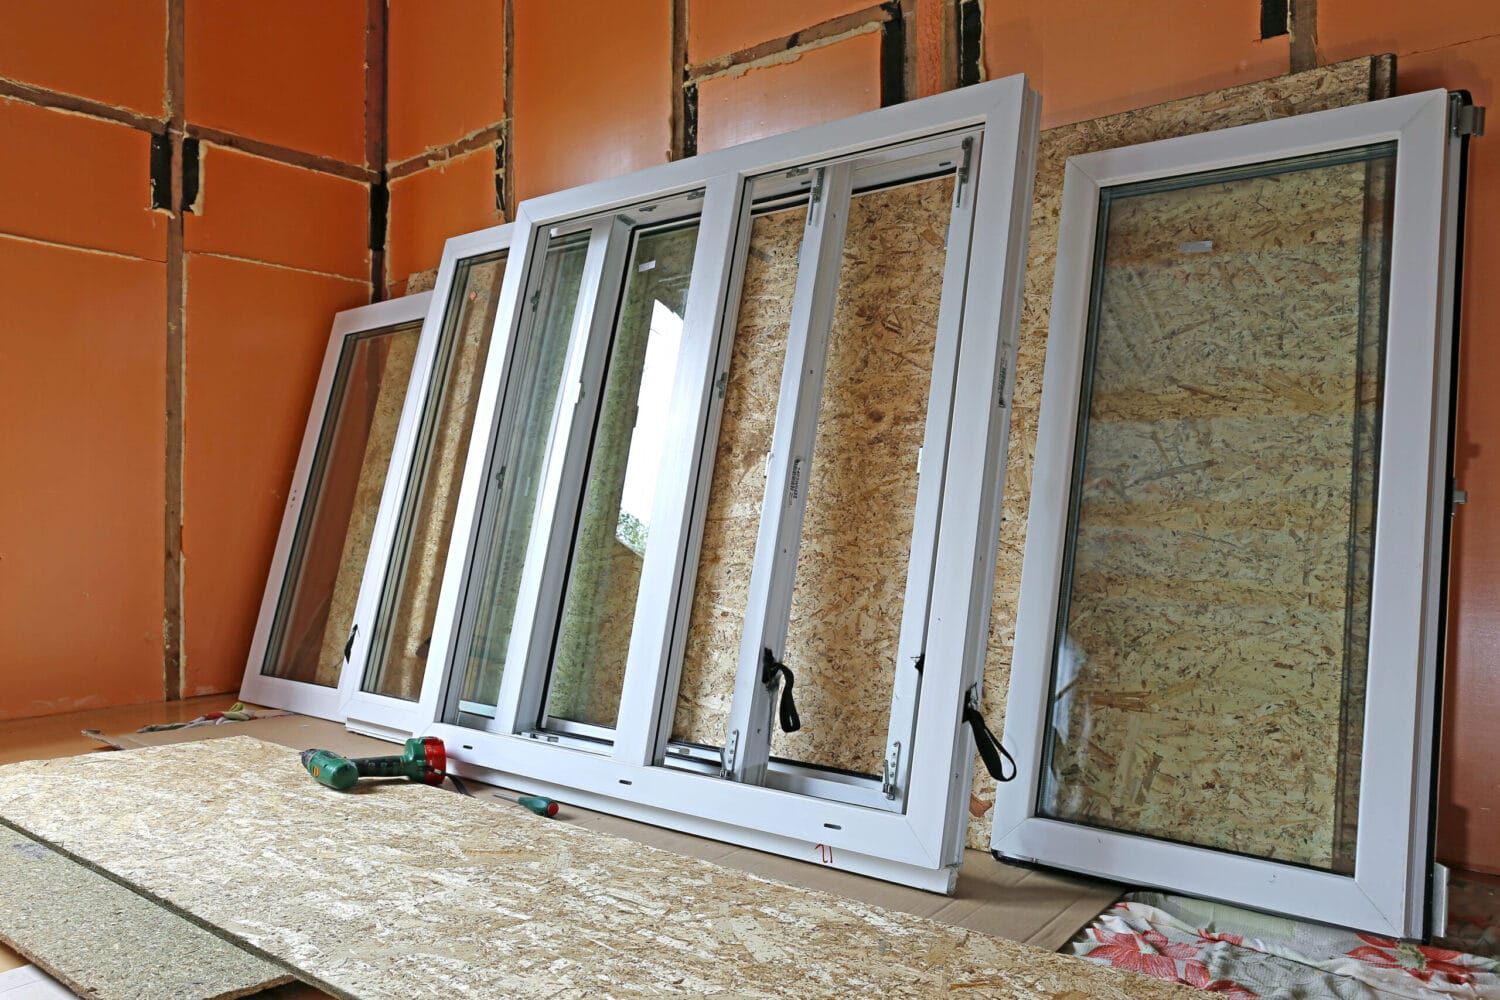 New Windows ready for installation